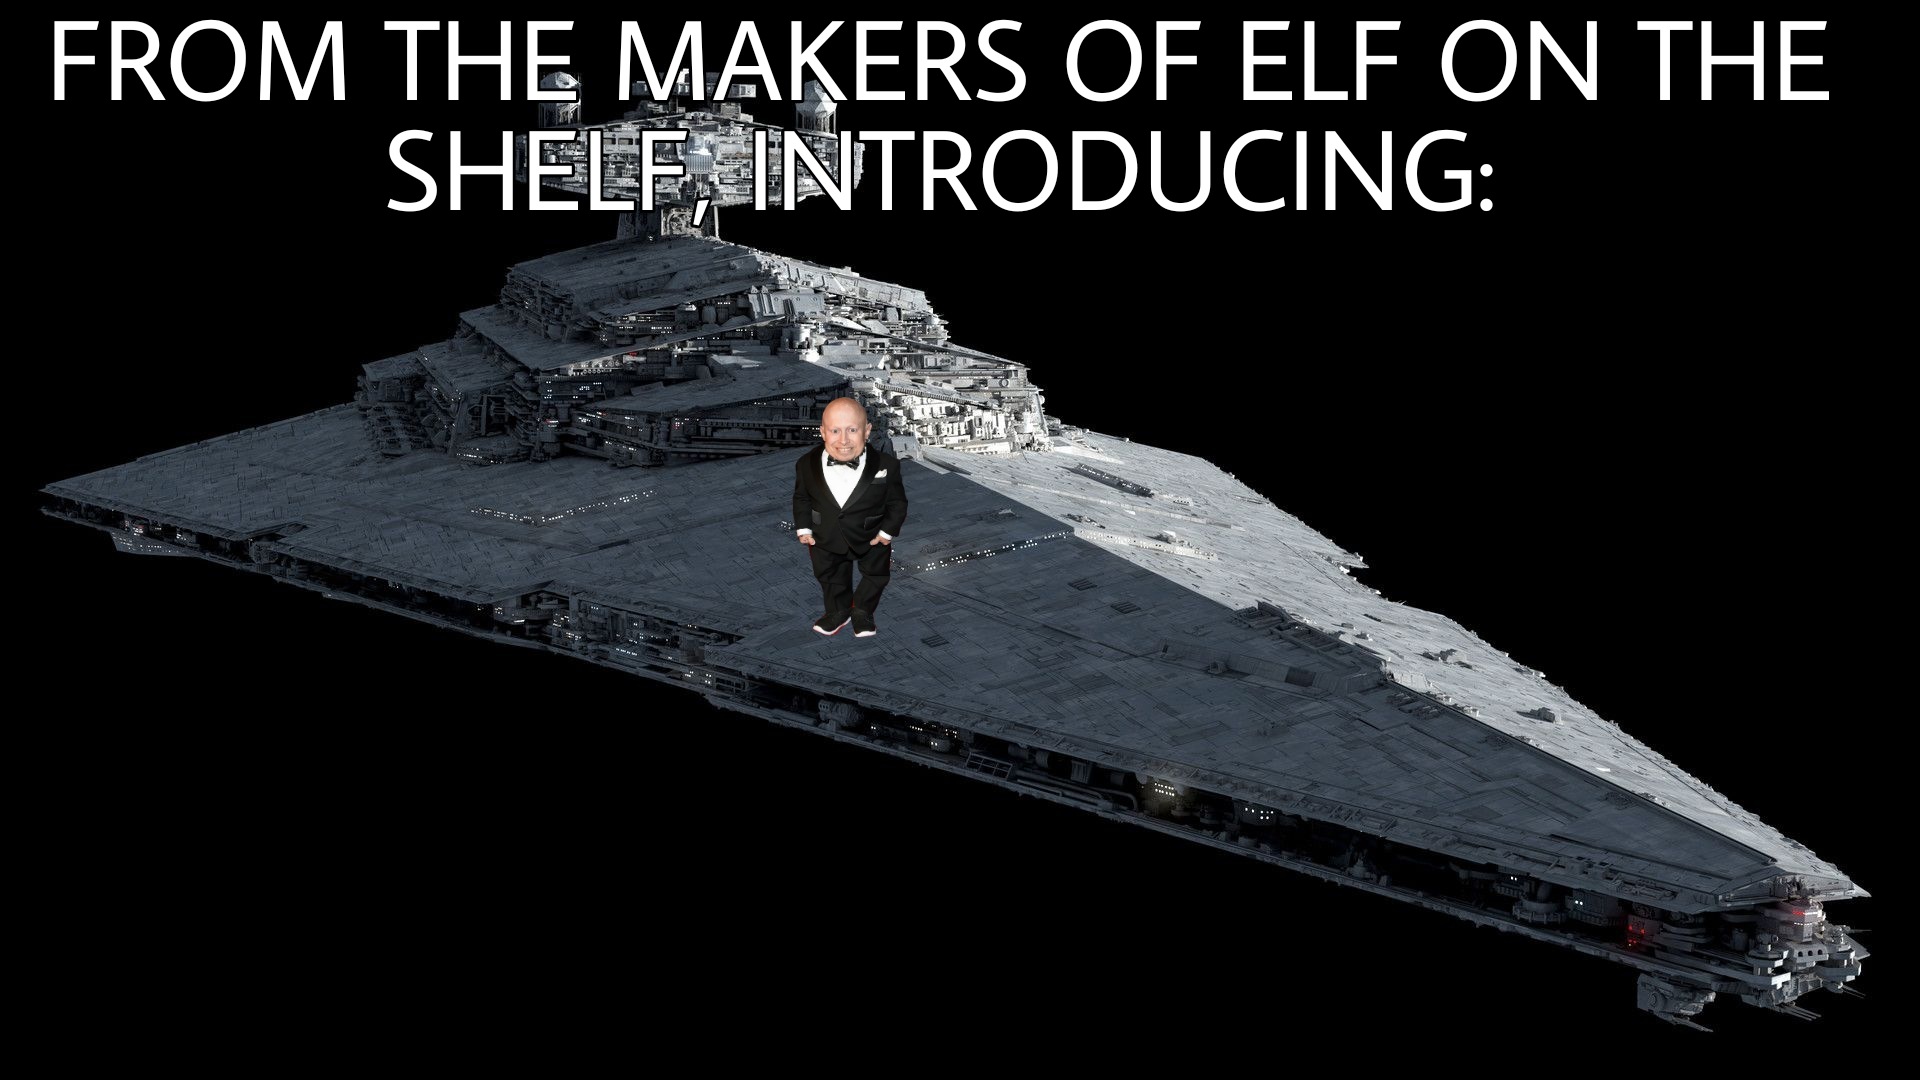 imperial class star destroyer 4k - From The Makers Of Elf On The Shelf. Introducing